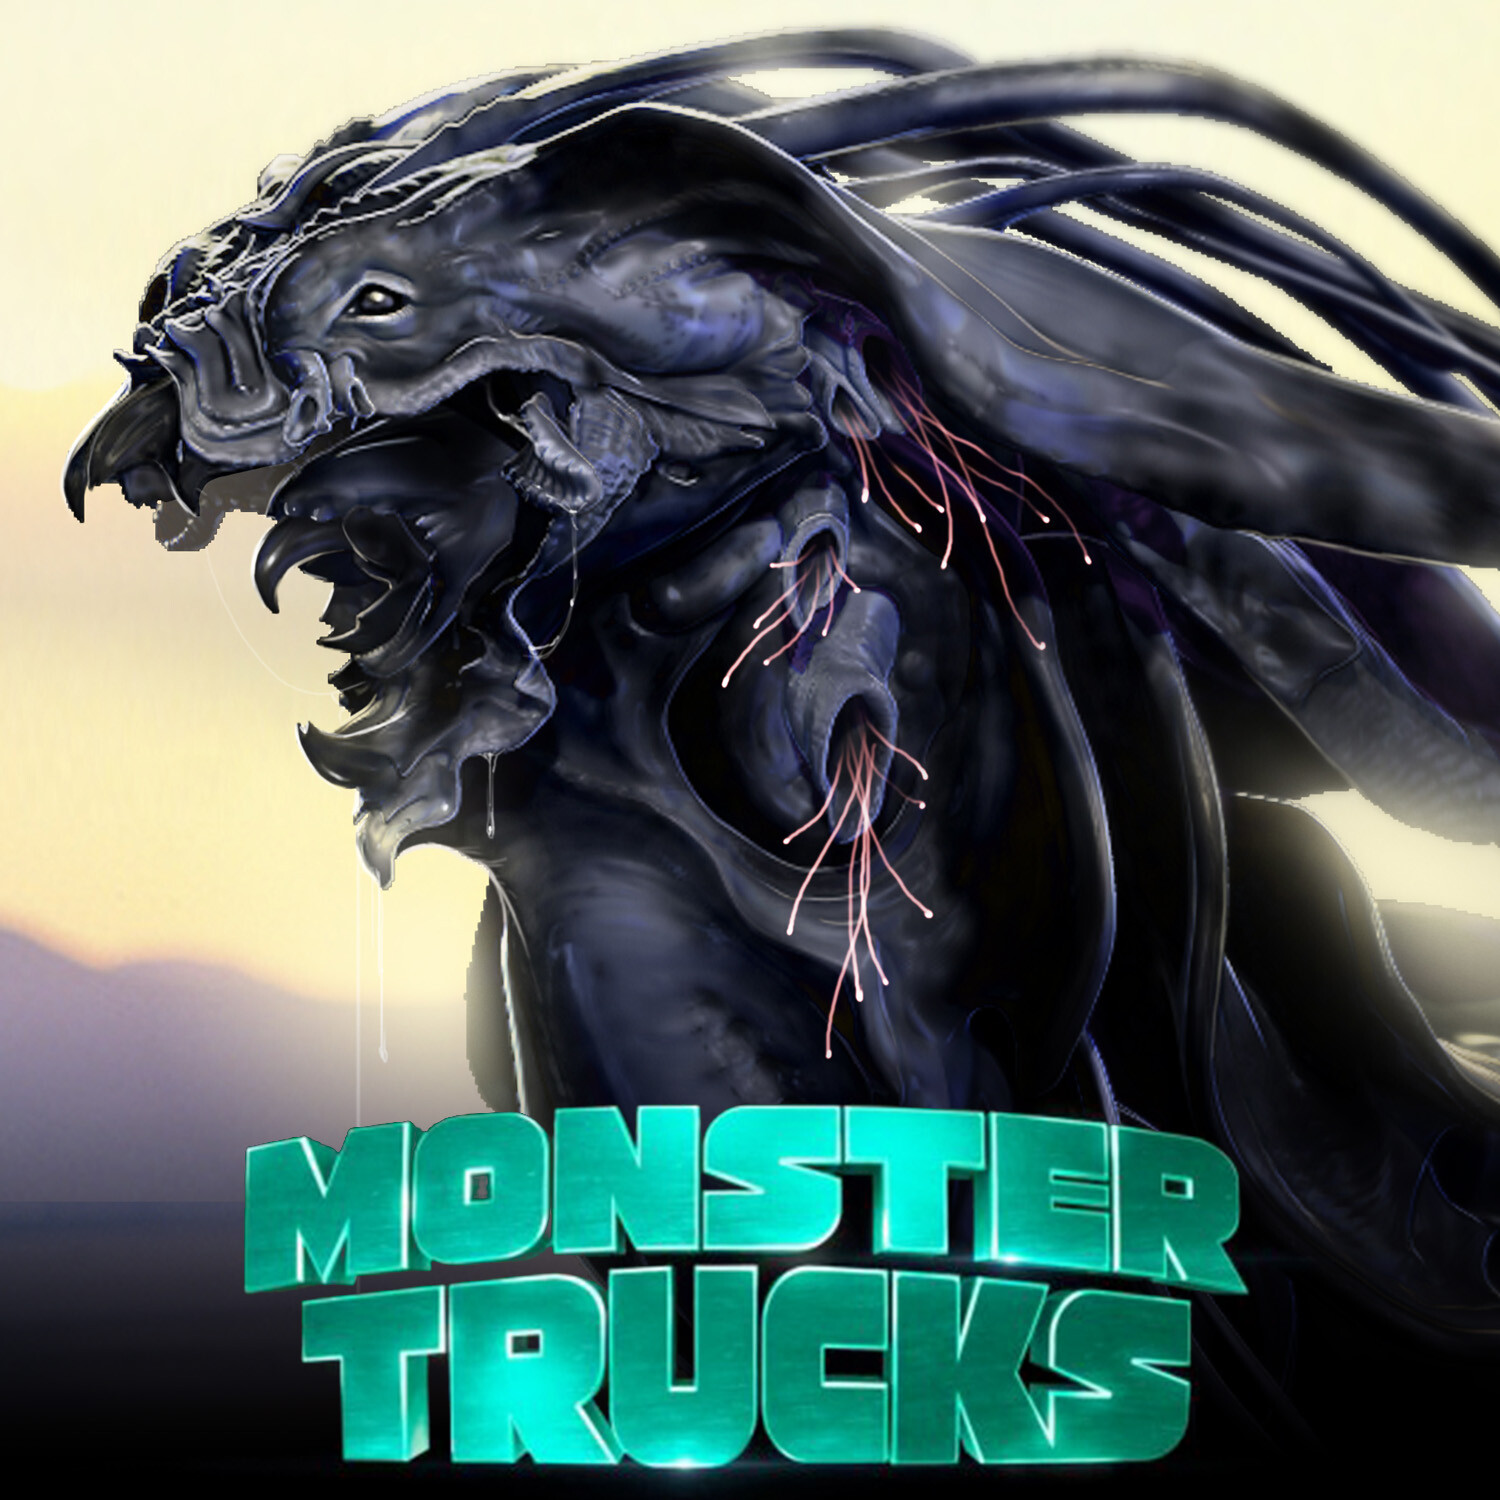 Pin by Chloee on Monster Truck Creech  Monster trucks movie, Monster trucks,  Big trucks